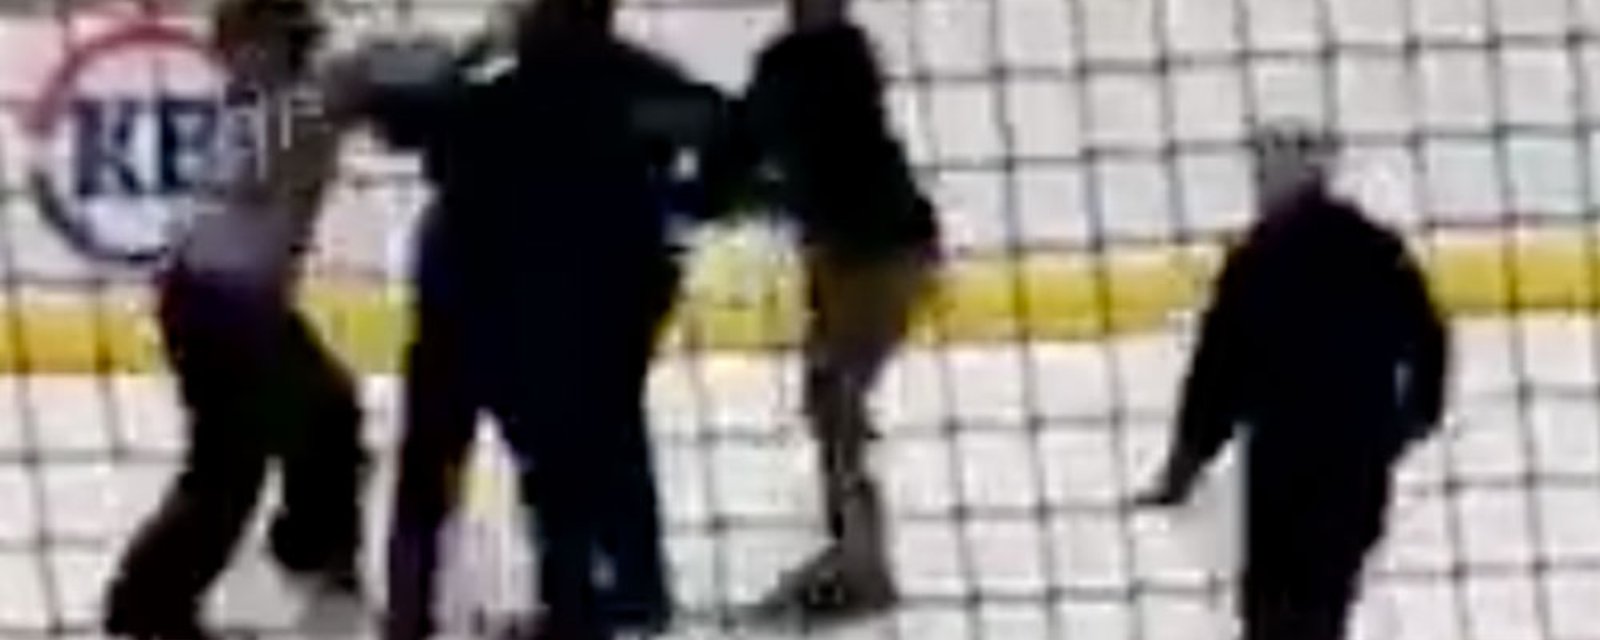 Referee assaulted on-ice by crazy hockey Dad in Alberta